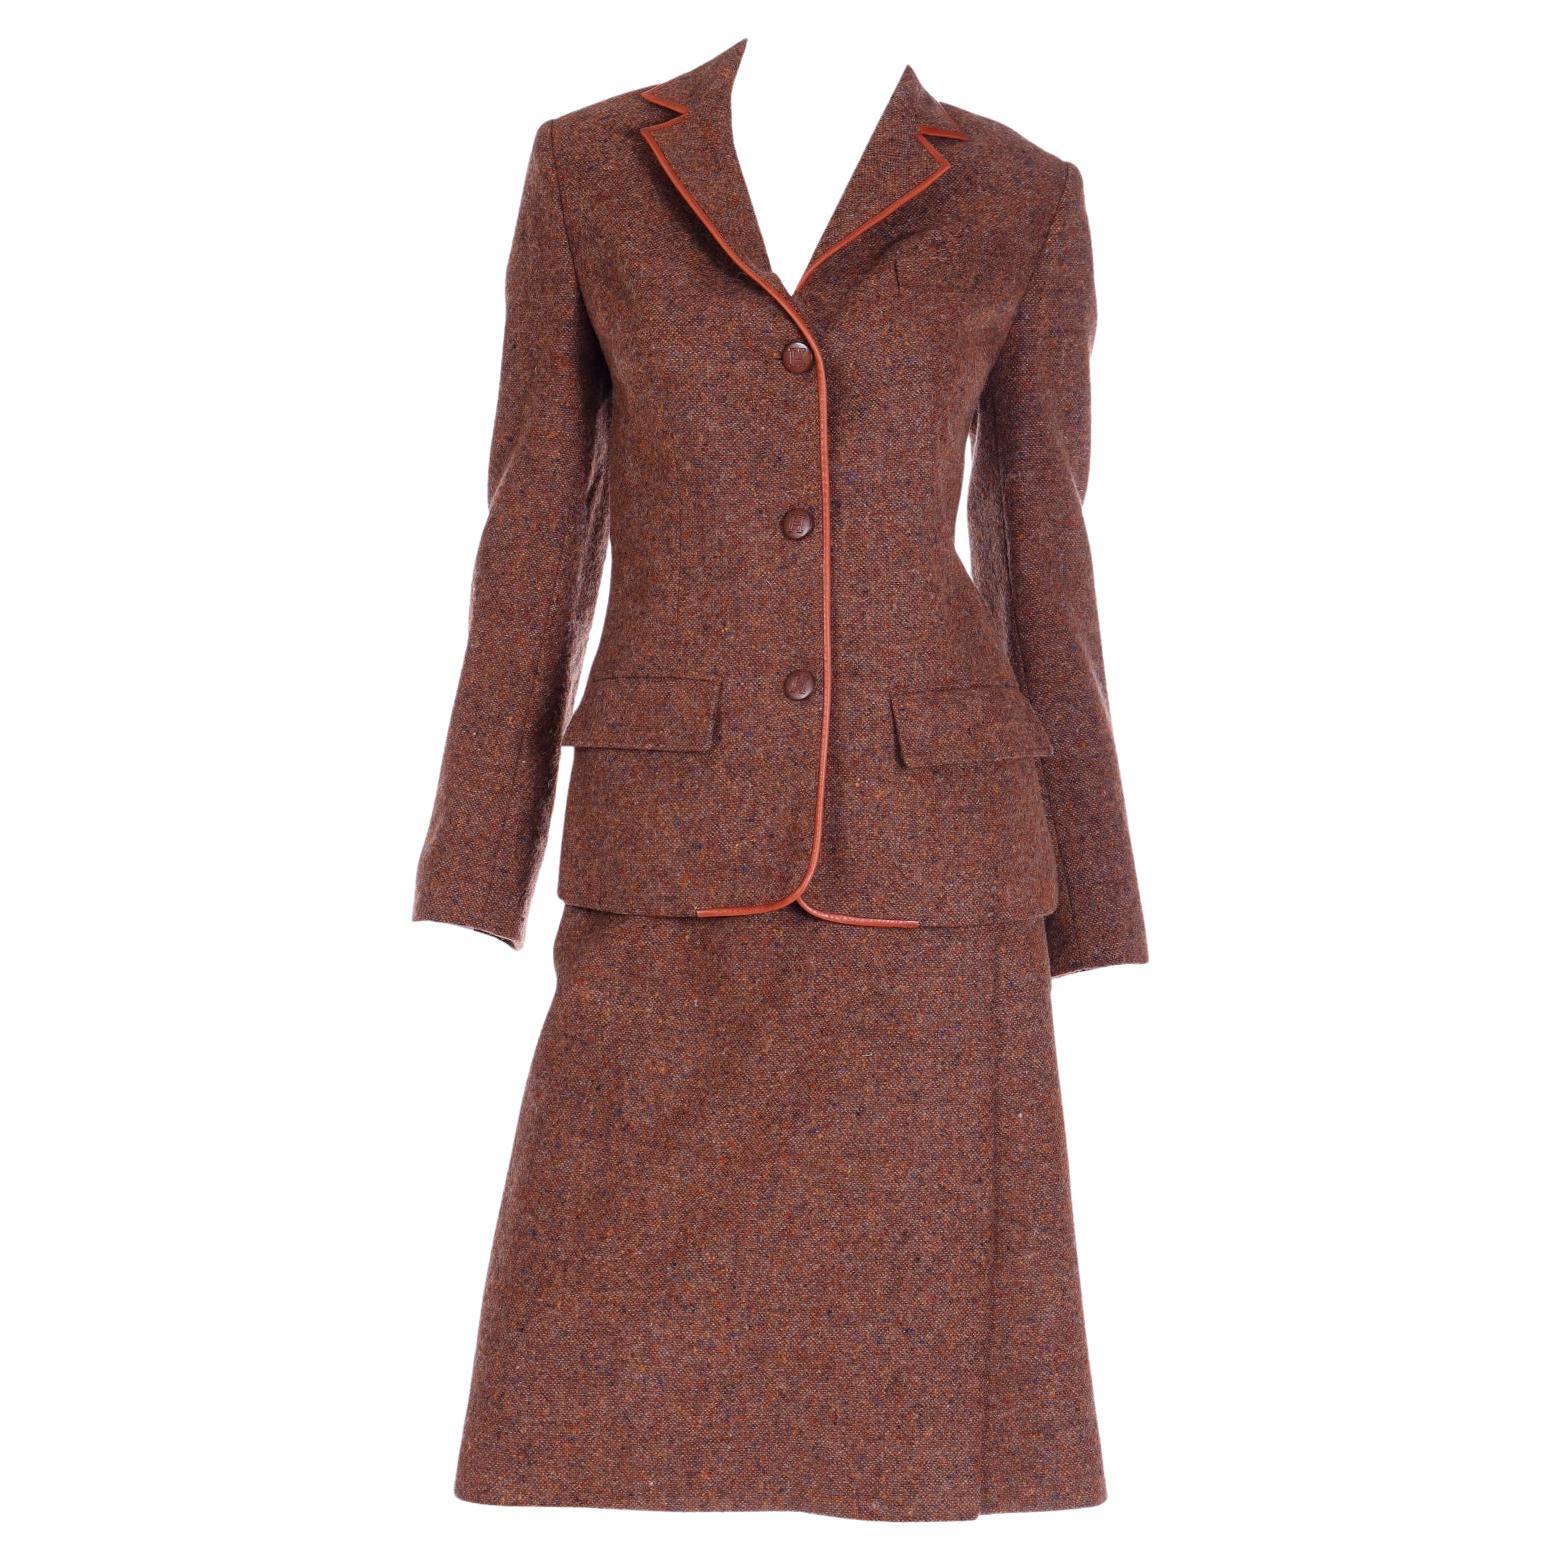 Hermes Vintage 1970s 2pc Jacket & Skirt Suit in Brown Tweed With Leather Trim For Sale